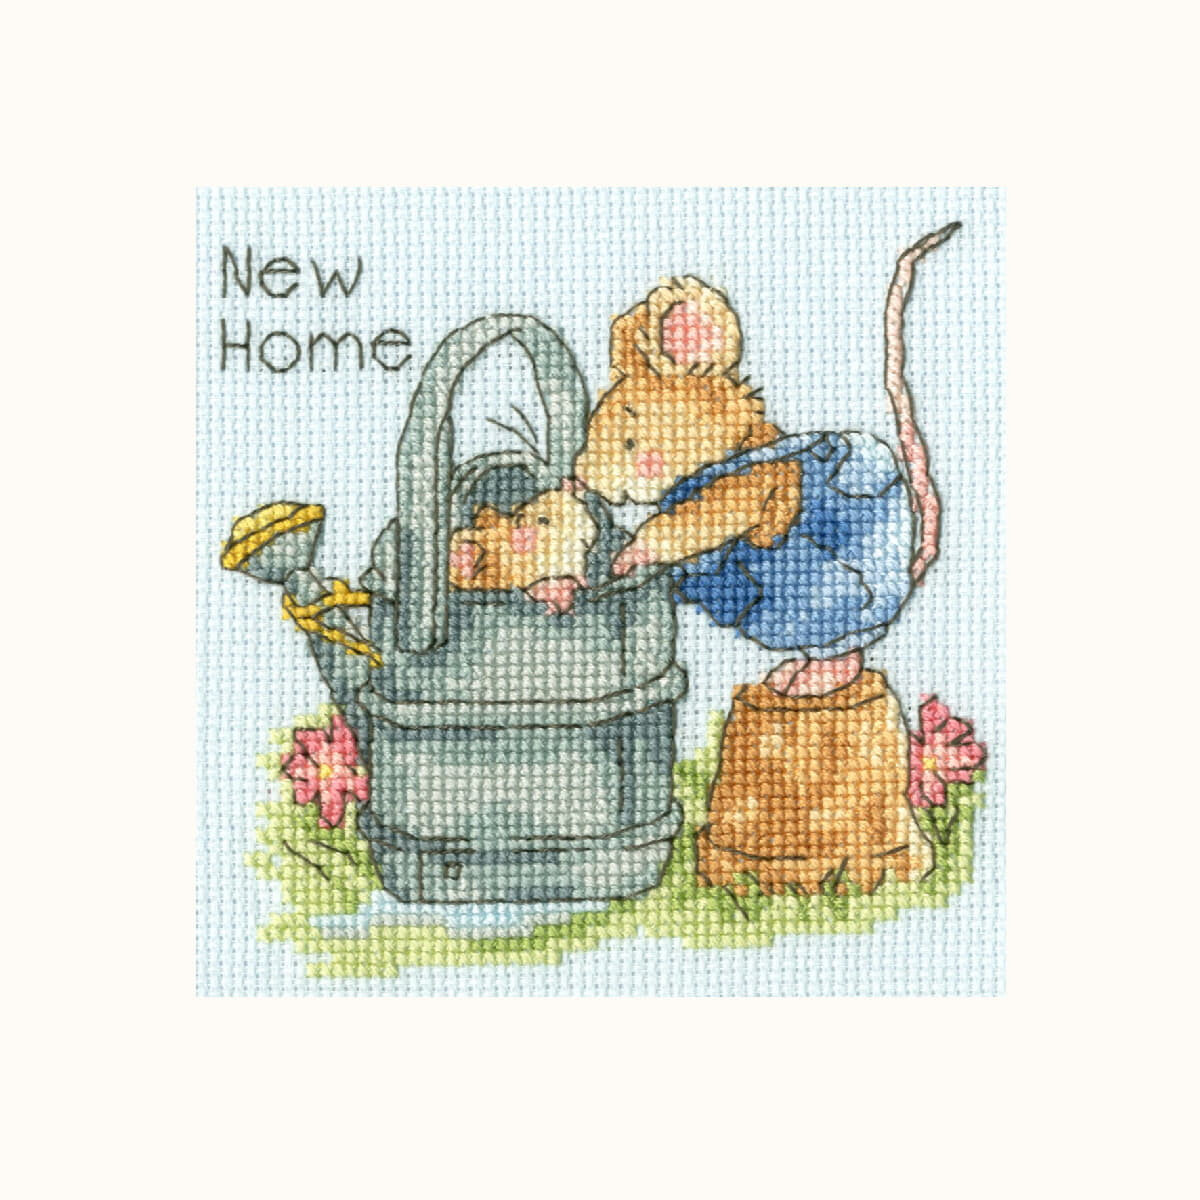 An adorable cross stitch pattern or embroidery pack from...